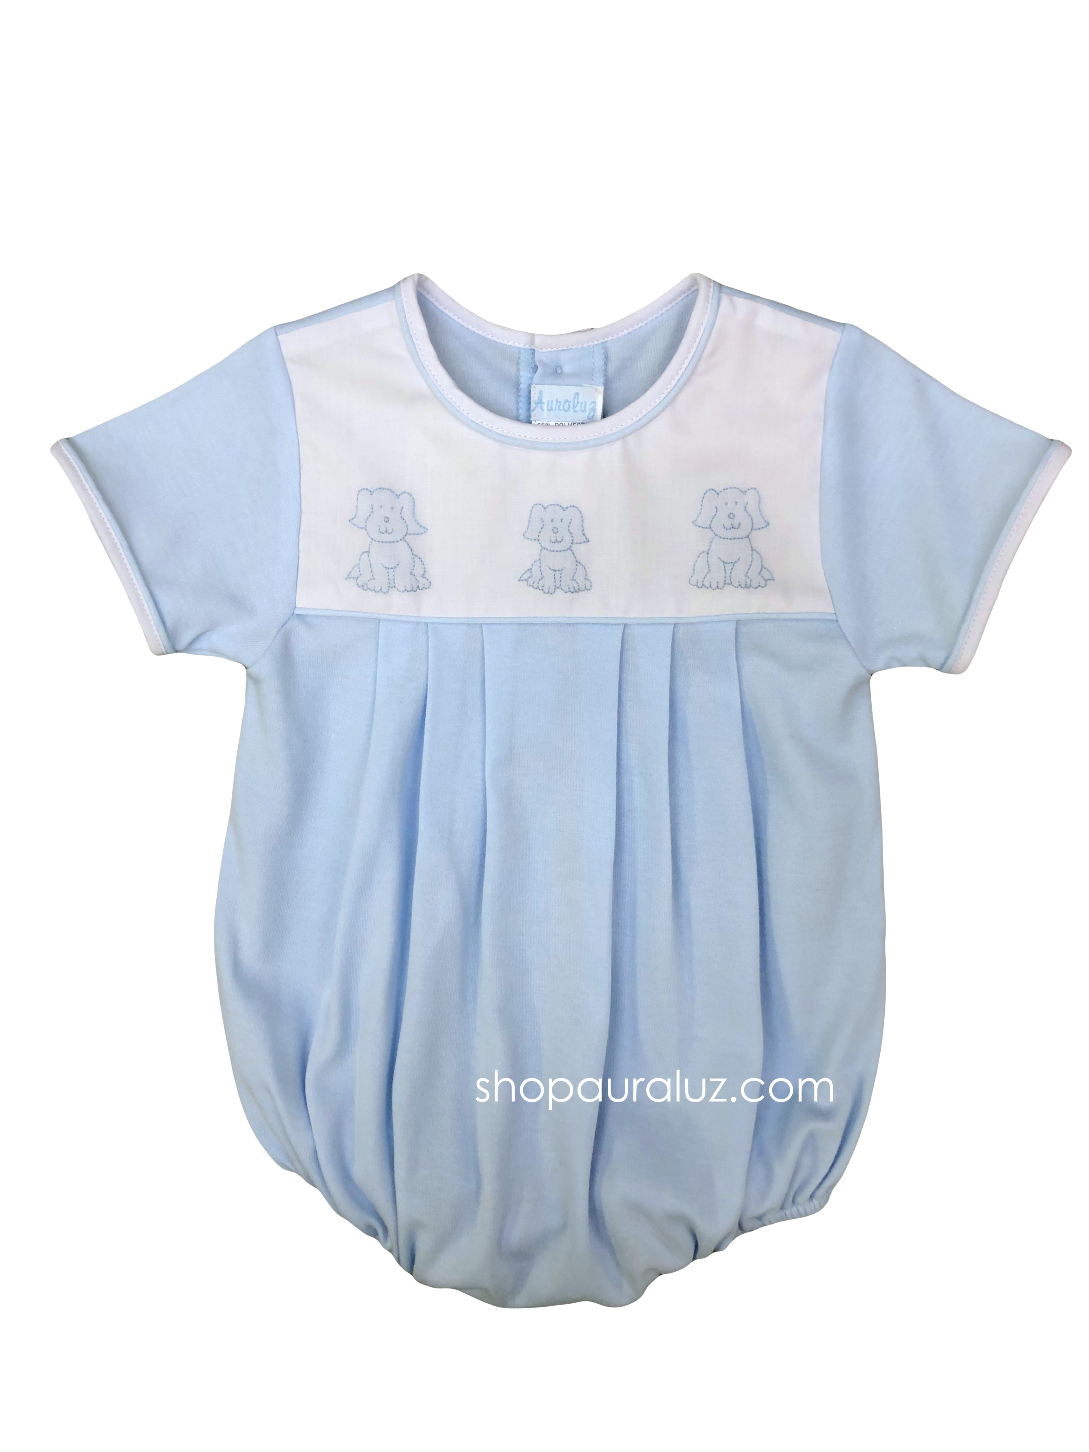 Auraluz Knit Boy Bubble..Blue with embroidered puppies